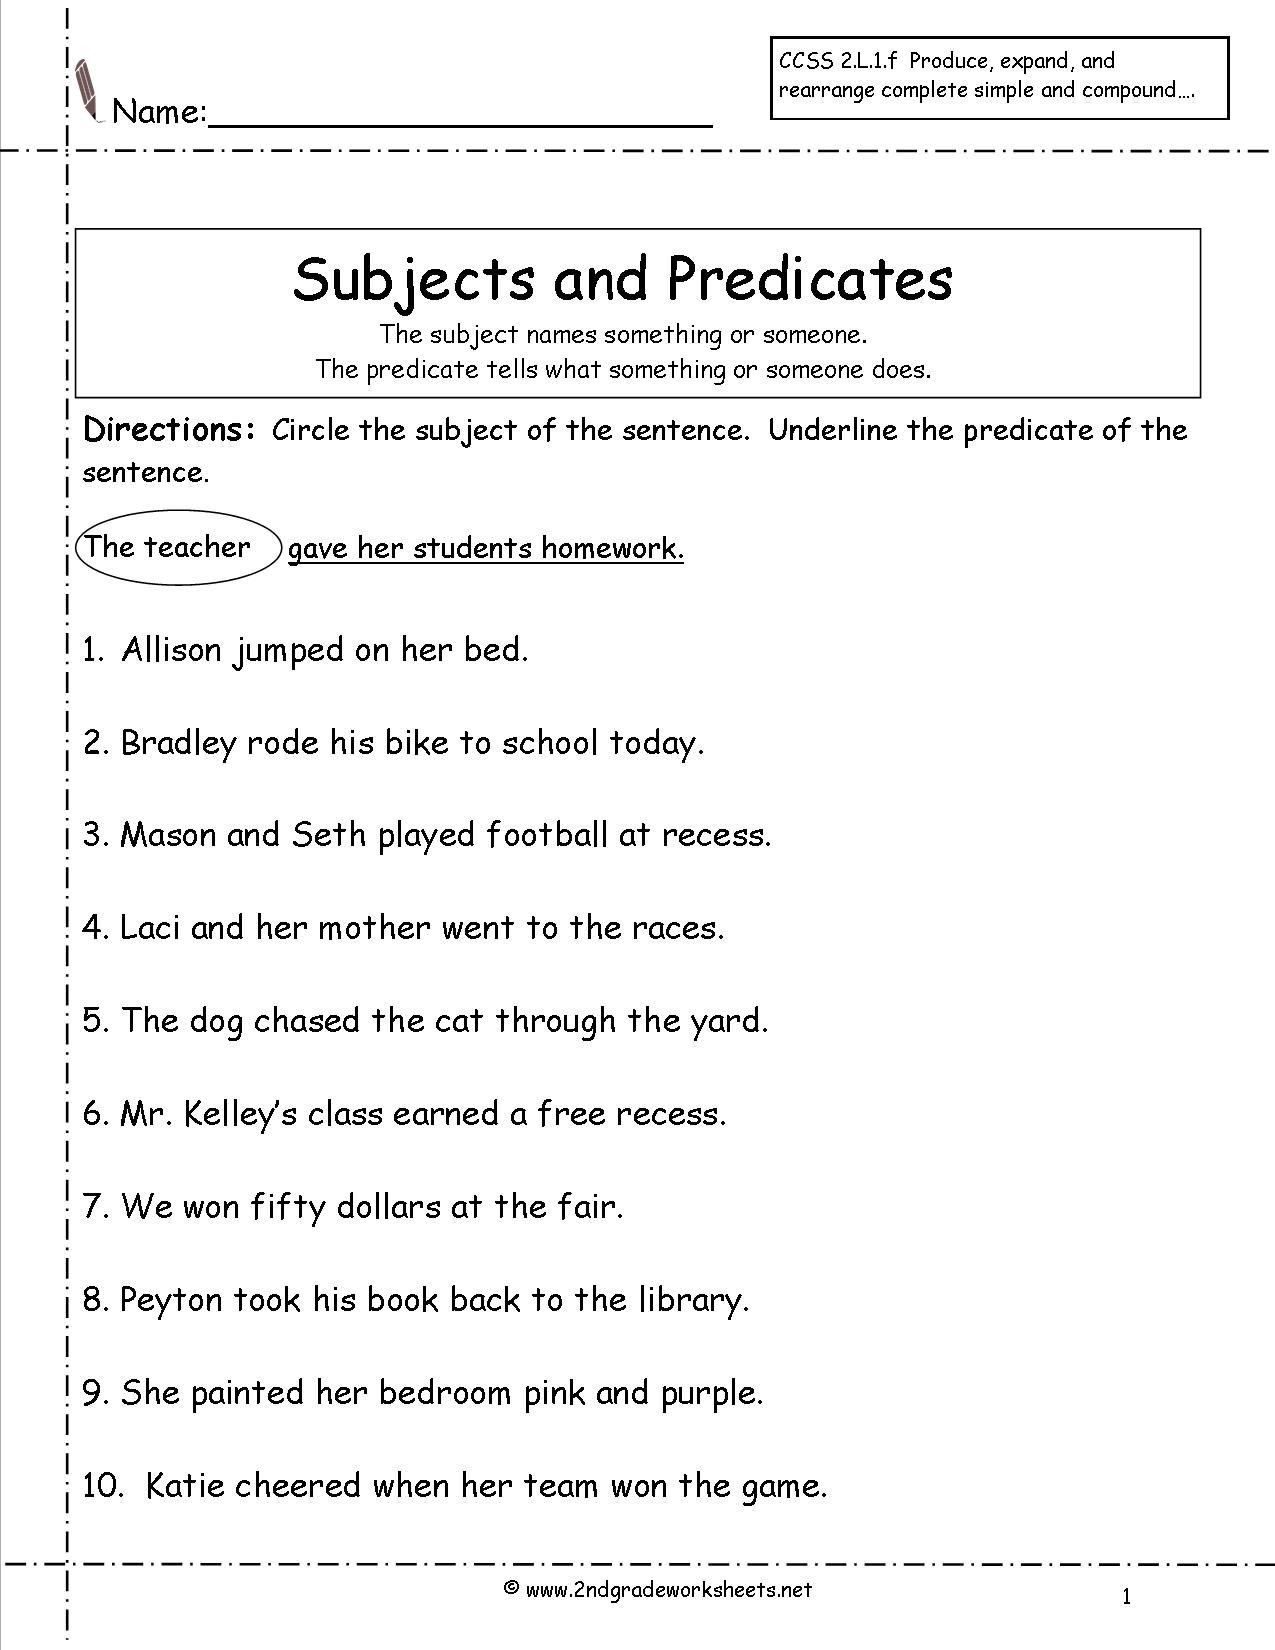 Complete Subject And Complete Predicate Worksheet With Answers